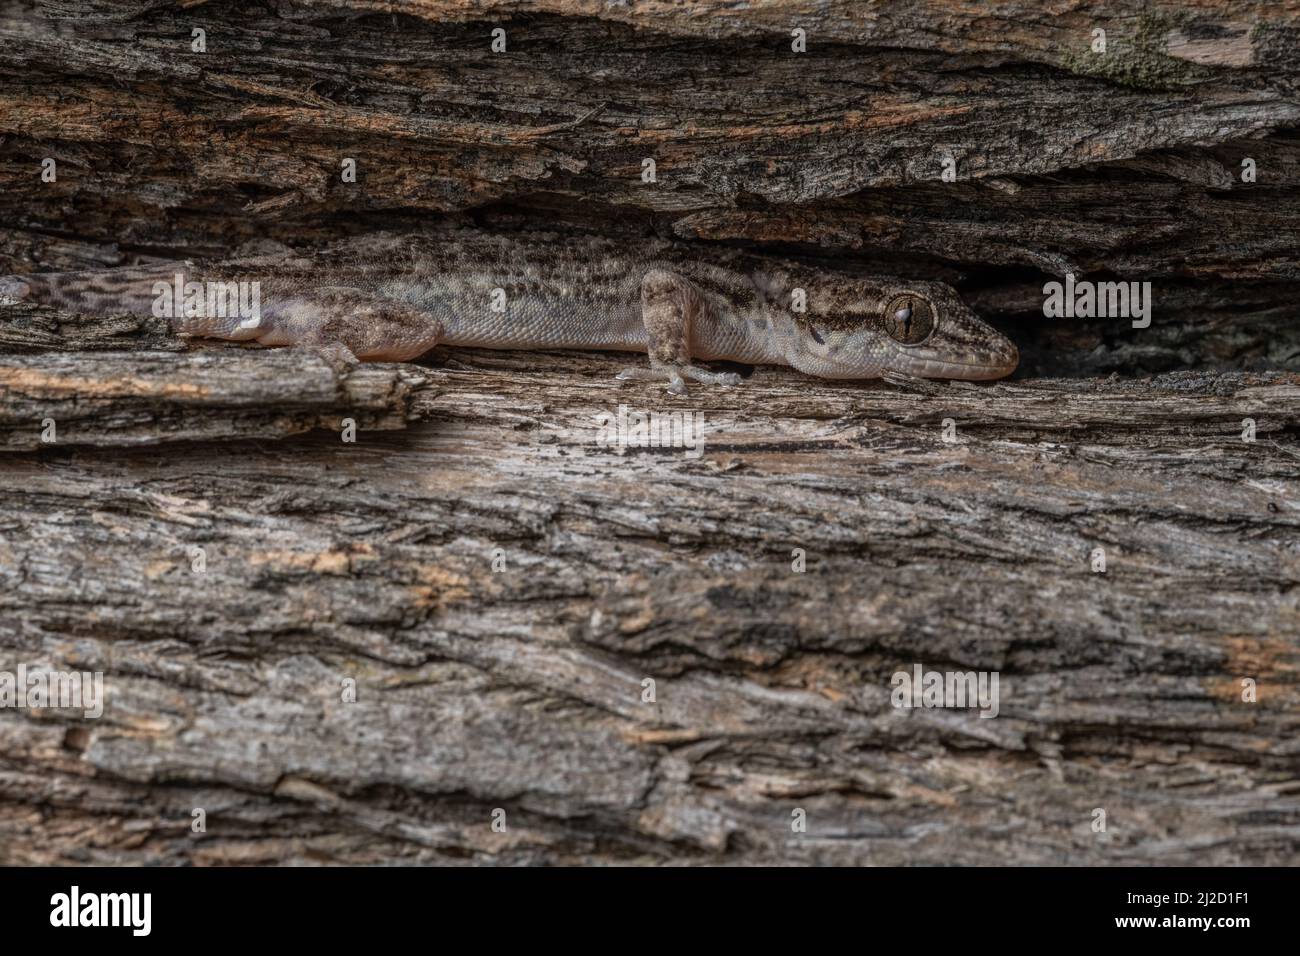 coastal leaf-toed gecko (Phyllodactylus reissii) hiding on a tree trunk blending in and camouflaged on the bark in the dry forest of Ecuador. Stock Photo